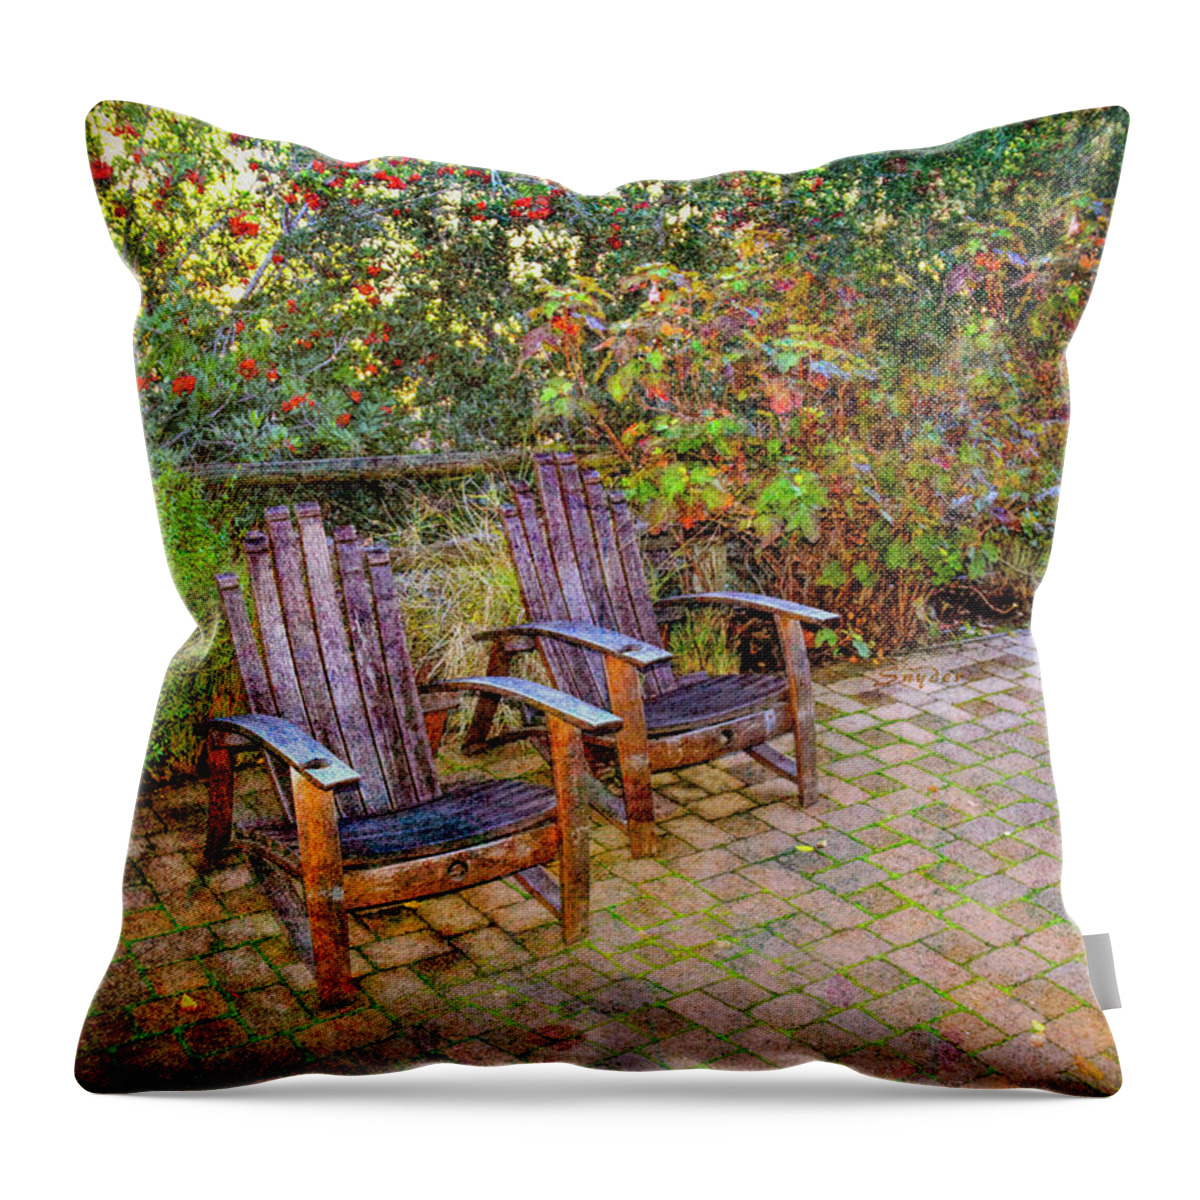 Red Brick Patio Throw Pillow featuring the photograph Red Brick Patio by Floyd Snyder